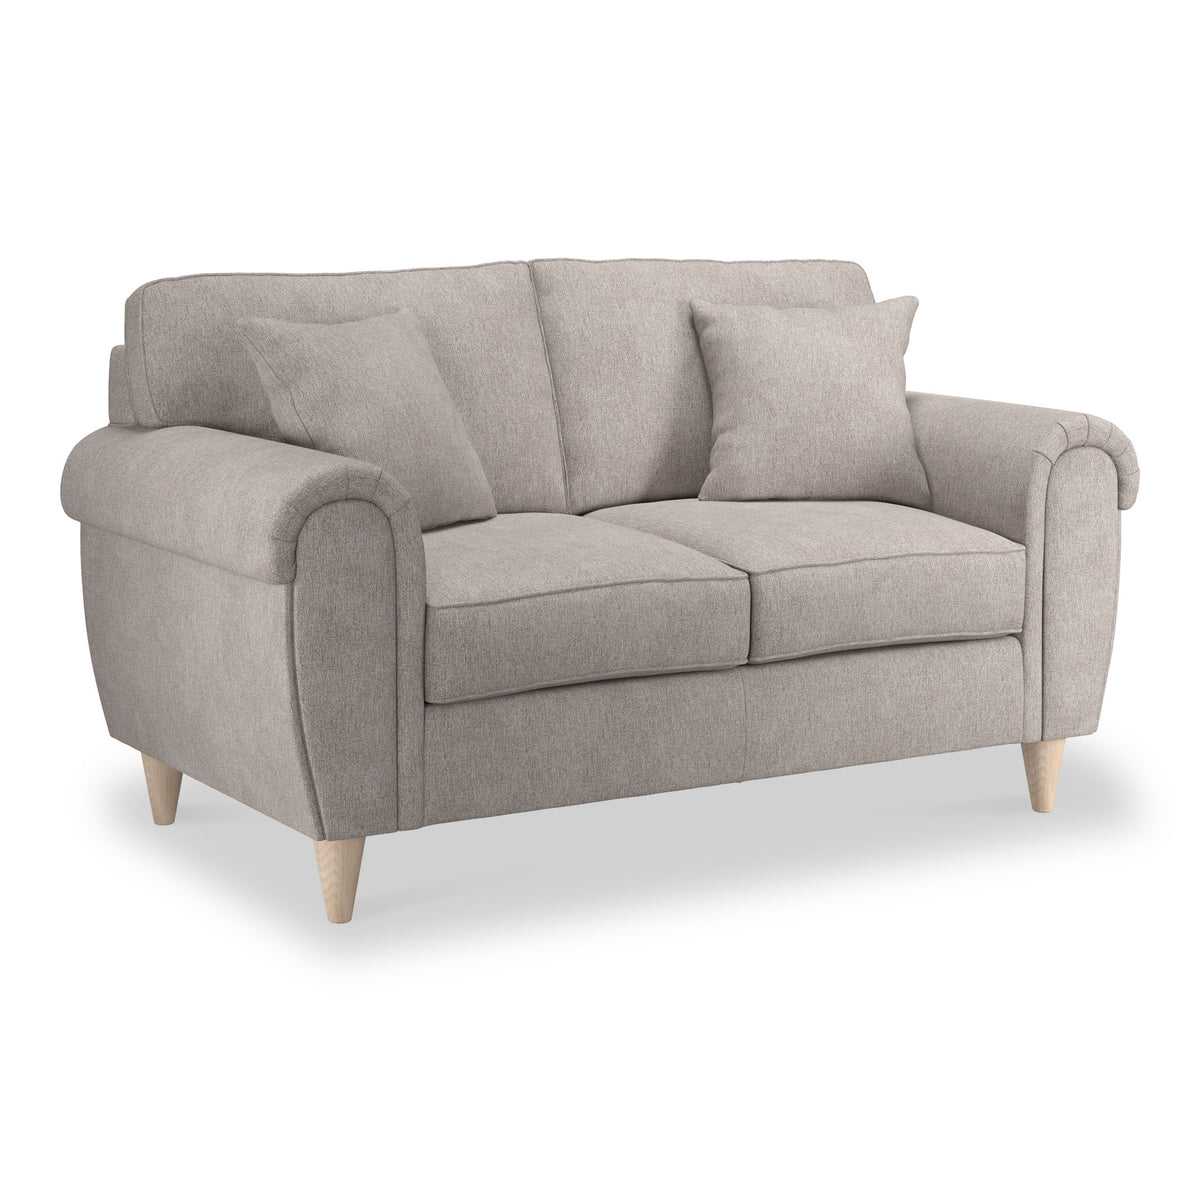 Harry Natural 2 Seater Sofa from Roseland Furniture